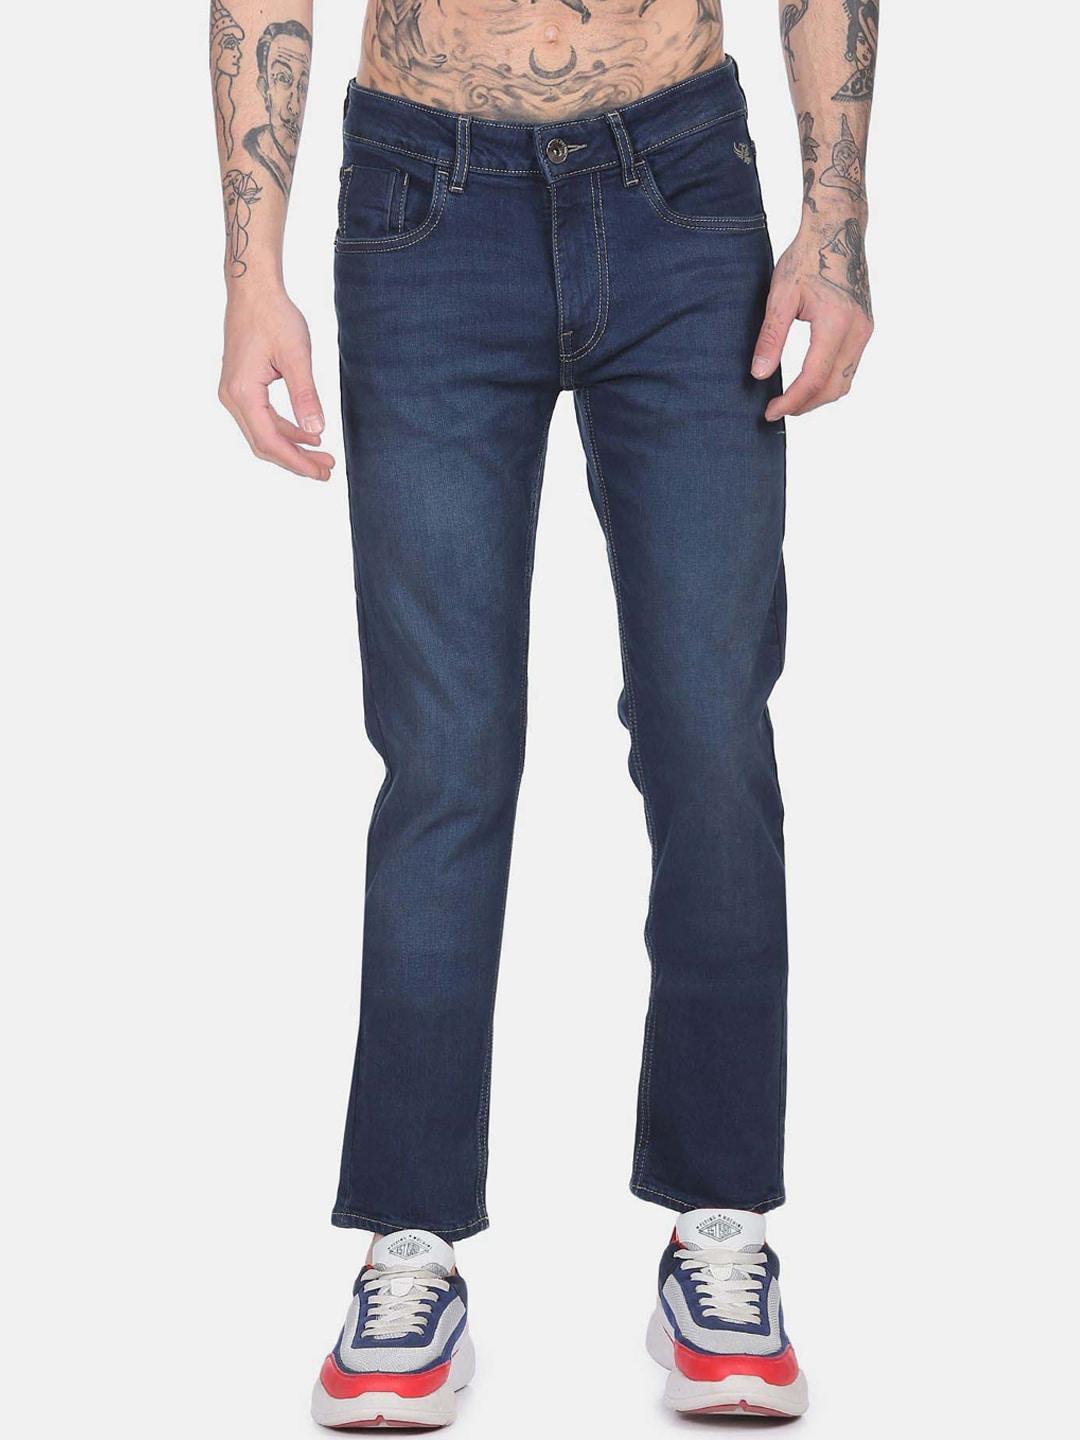 flying-machine-men-mid-rise-tapered-fit-light-fade-stretchable-jeans